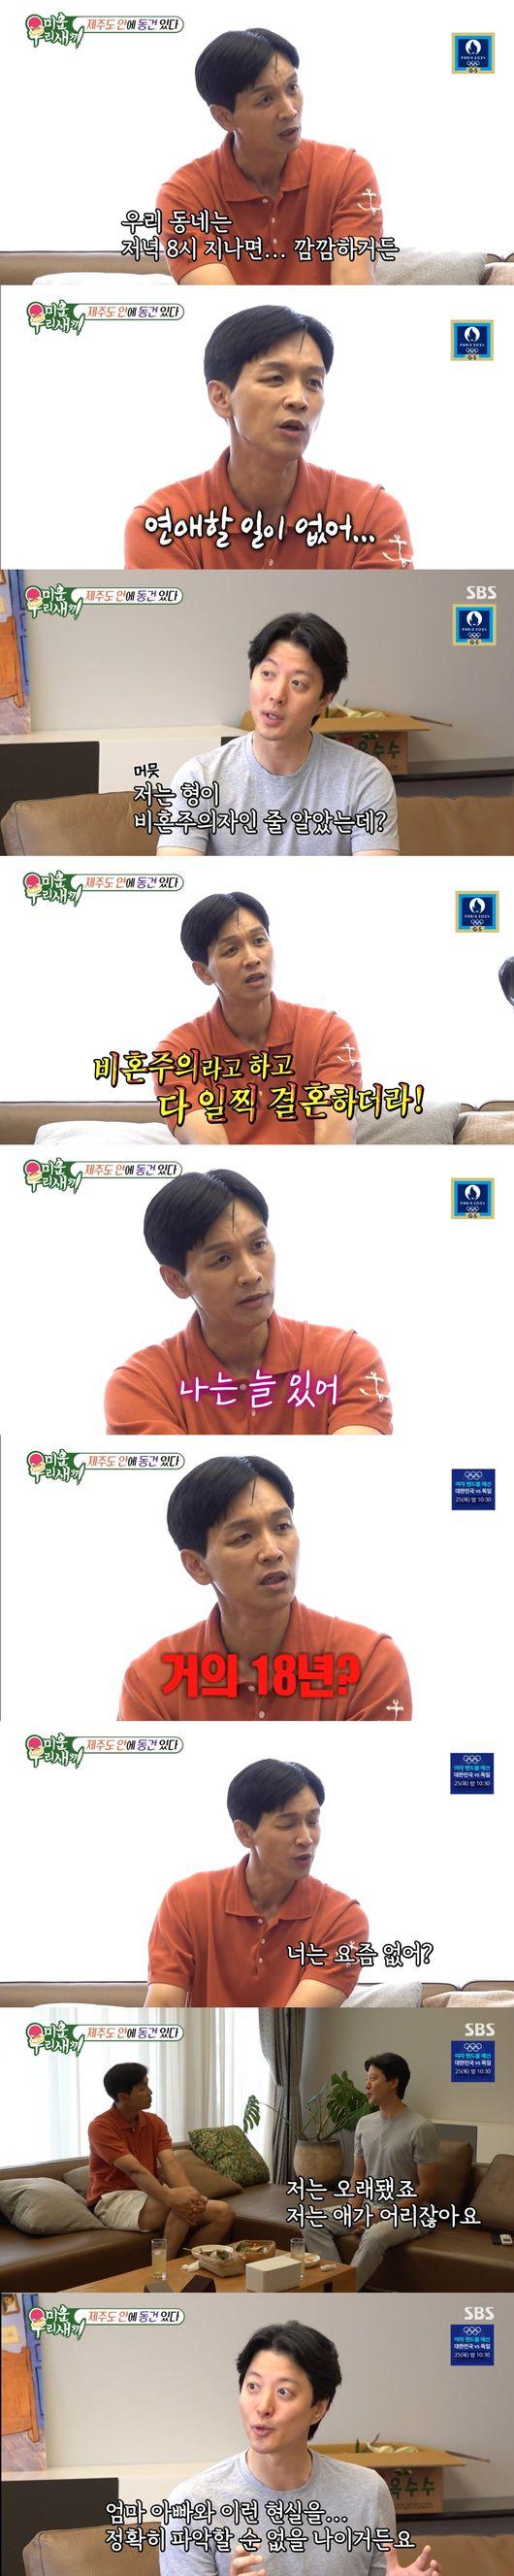 Lee Dong-gun's inner thoughts revealed for the first time after divorce, 